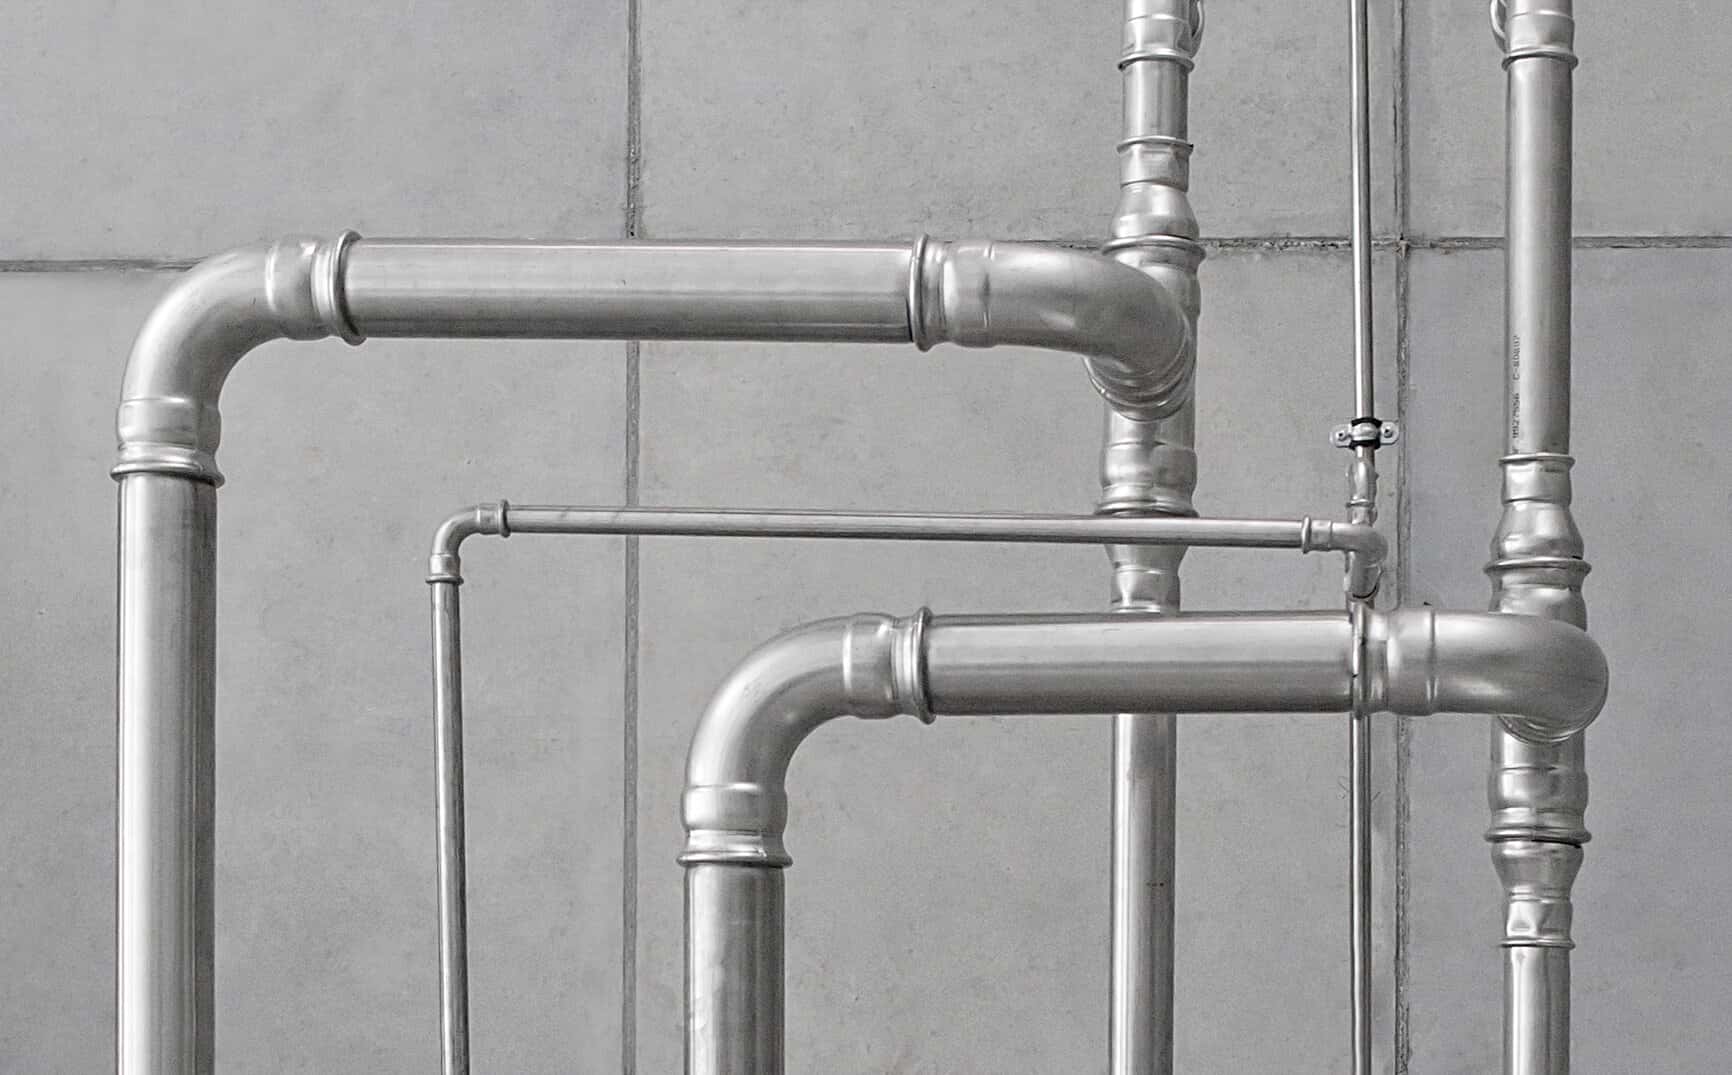 KAN-therm - Inox system - Pipes made of thin-walled stainless steel